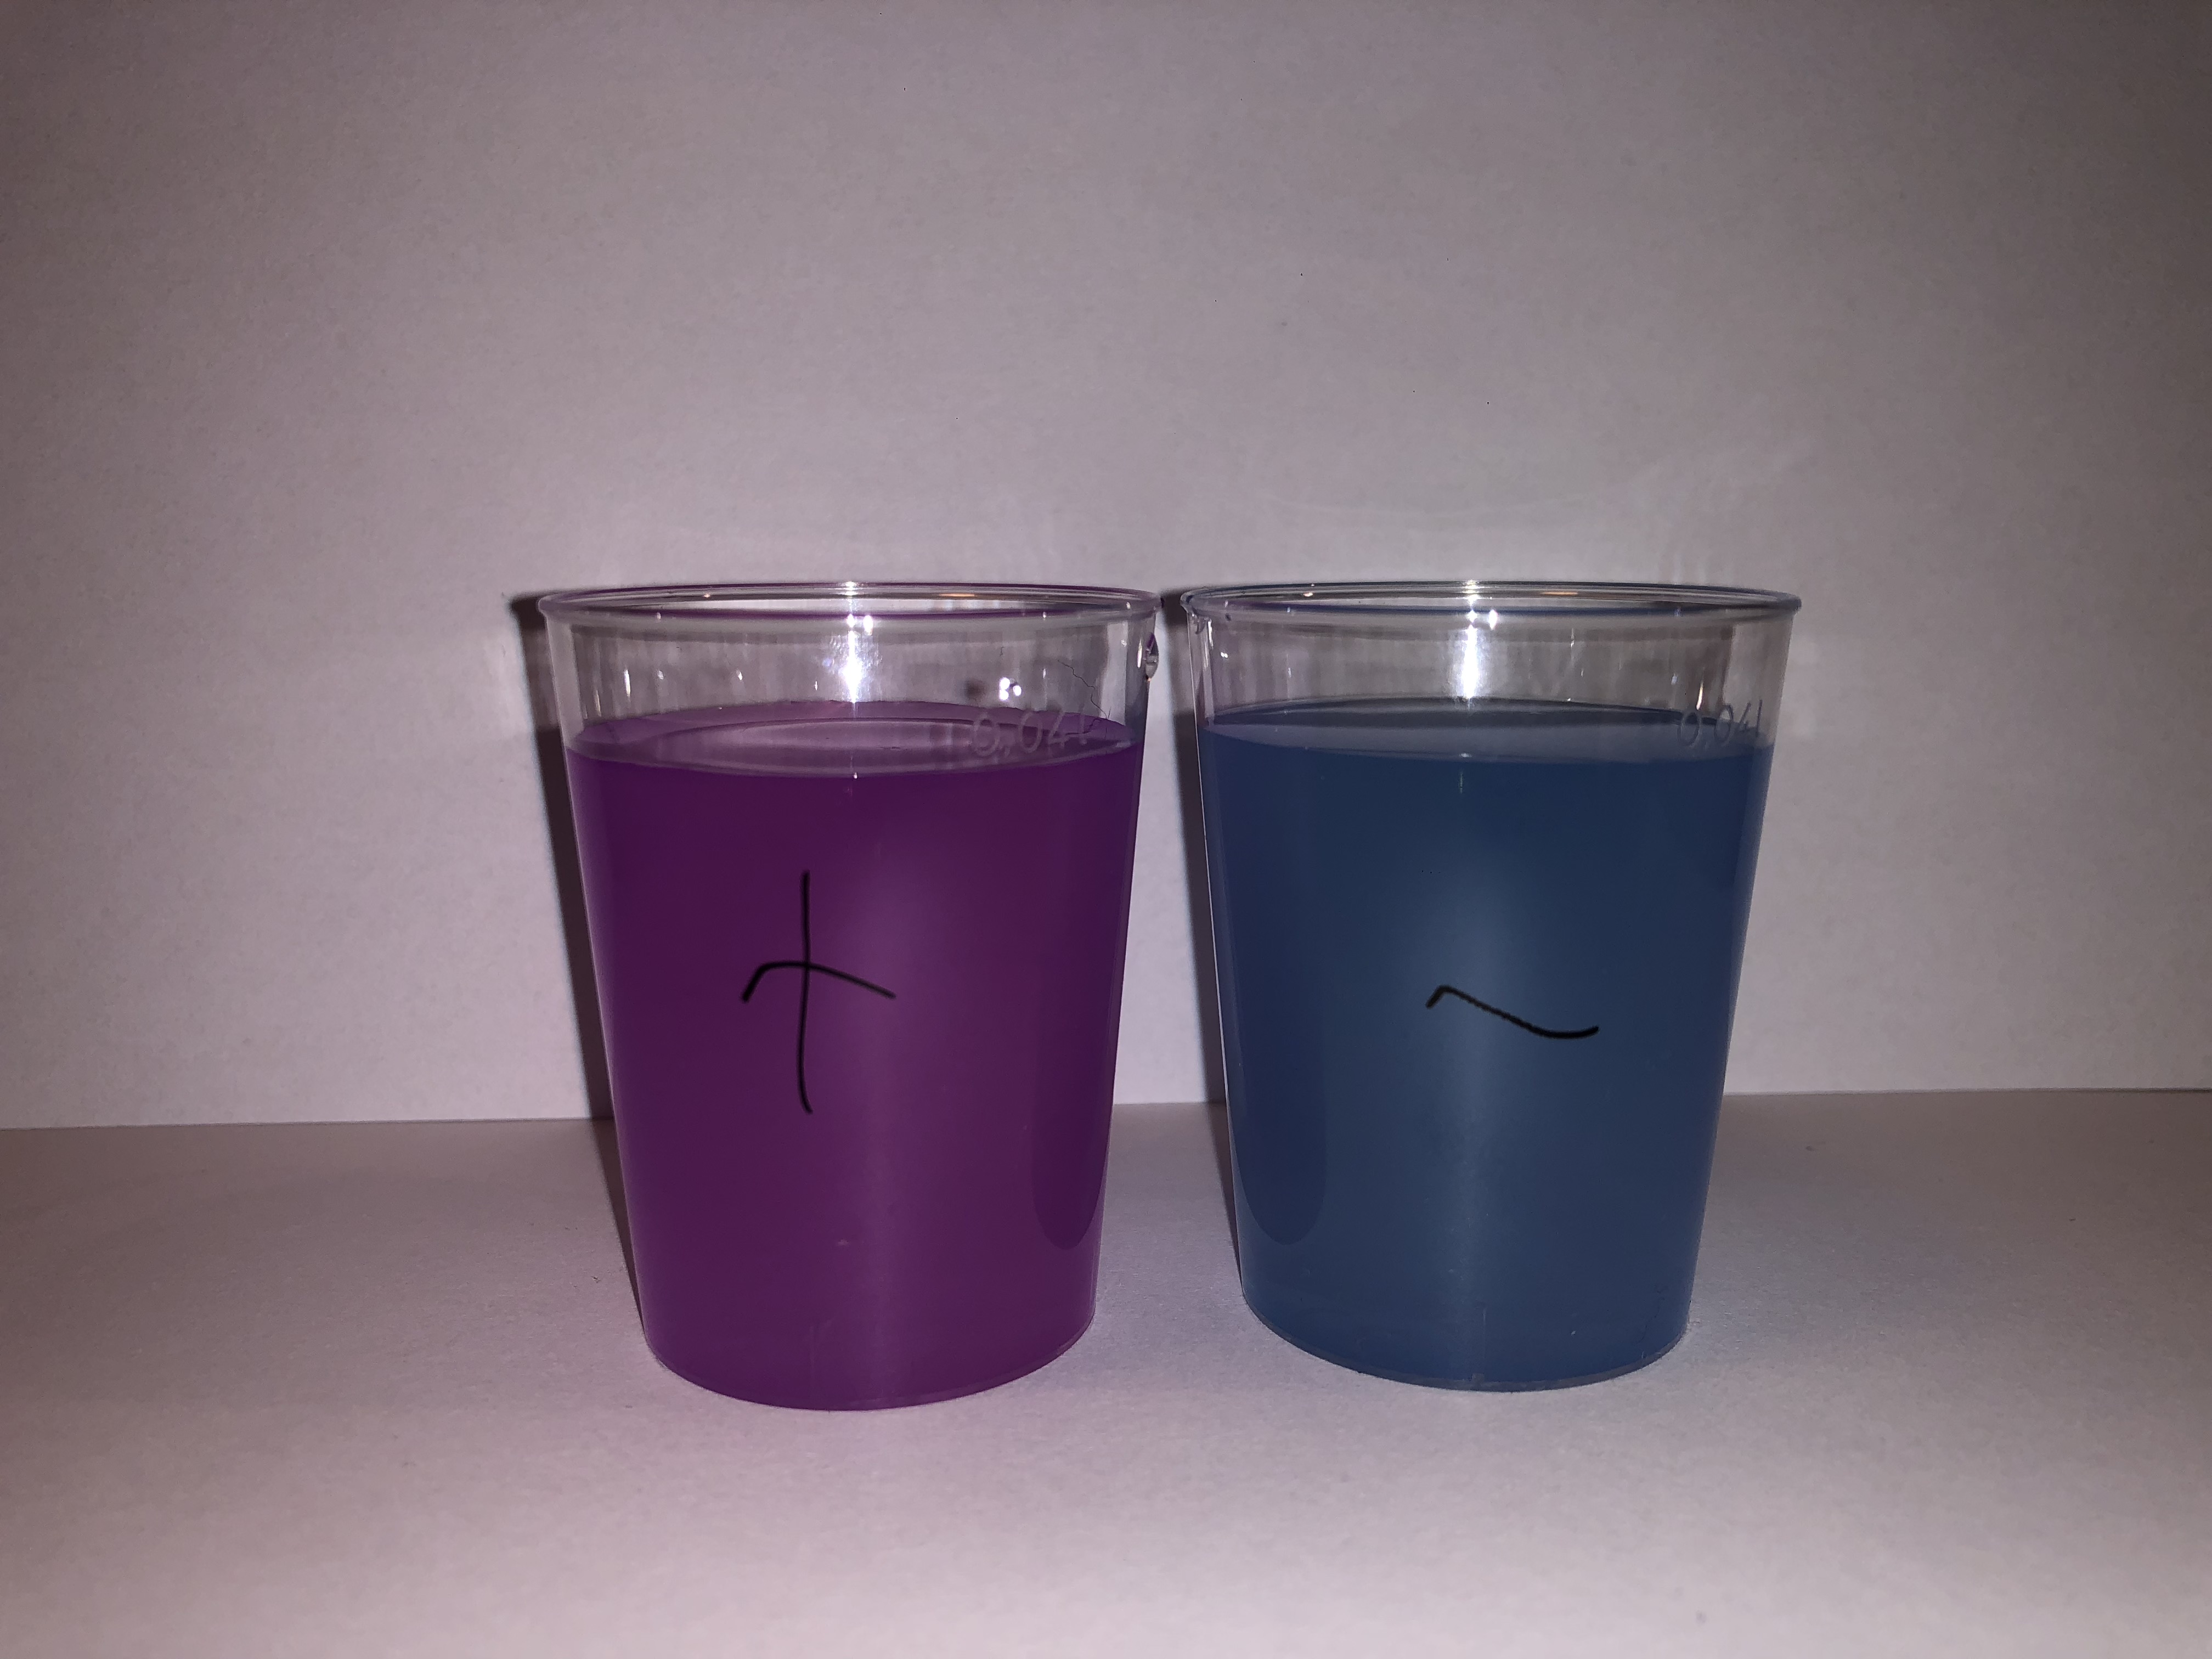 Photo of two cups containing solutions. In the cup on the left, the solution is purple. The left cup has a plus sign written on it (to denote the fact that the test result is positive). In the cup on the right, the solution is blue. The right cup has a minus sign written on it (to denote the fact that the test result is negative).